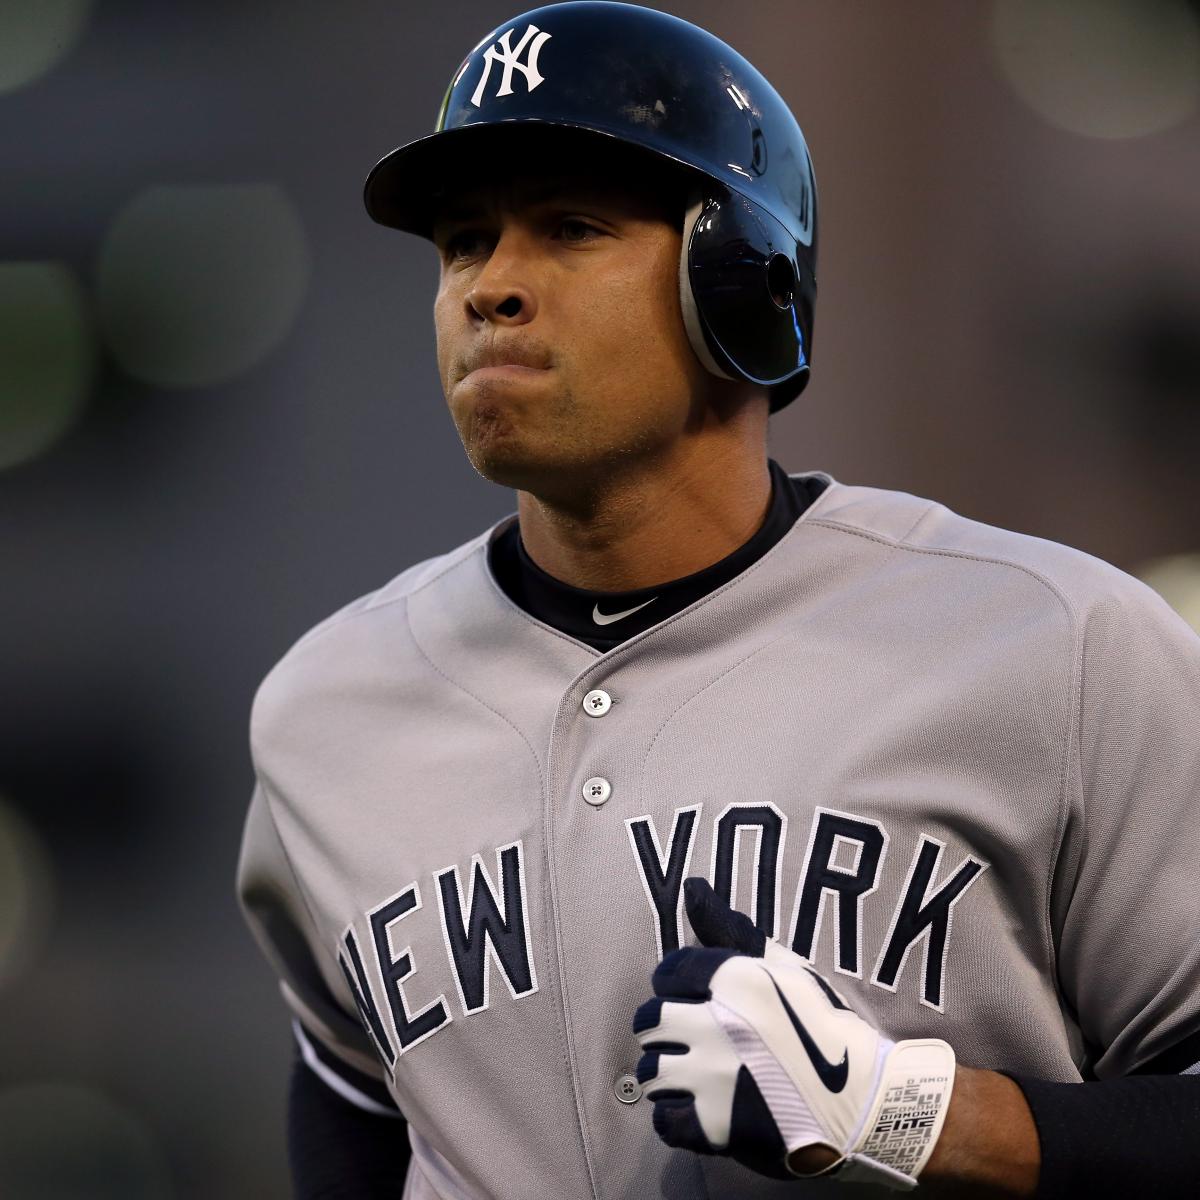 Yankees: Granderson introduced, Rodriguez's hip doing fine